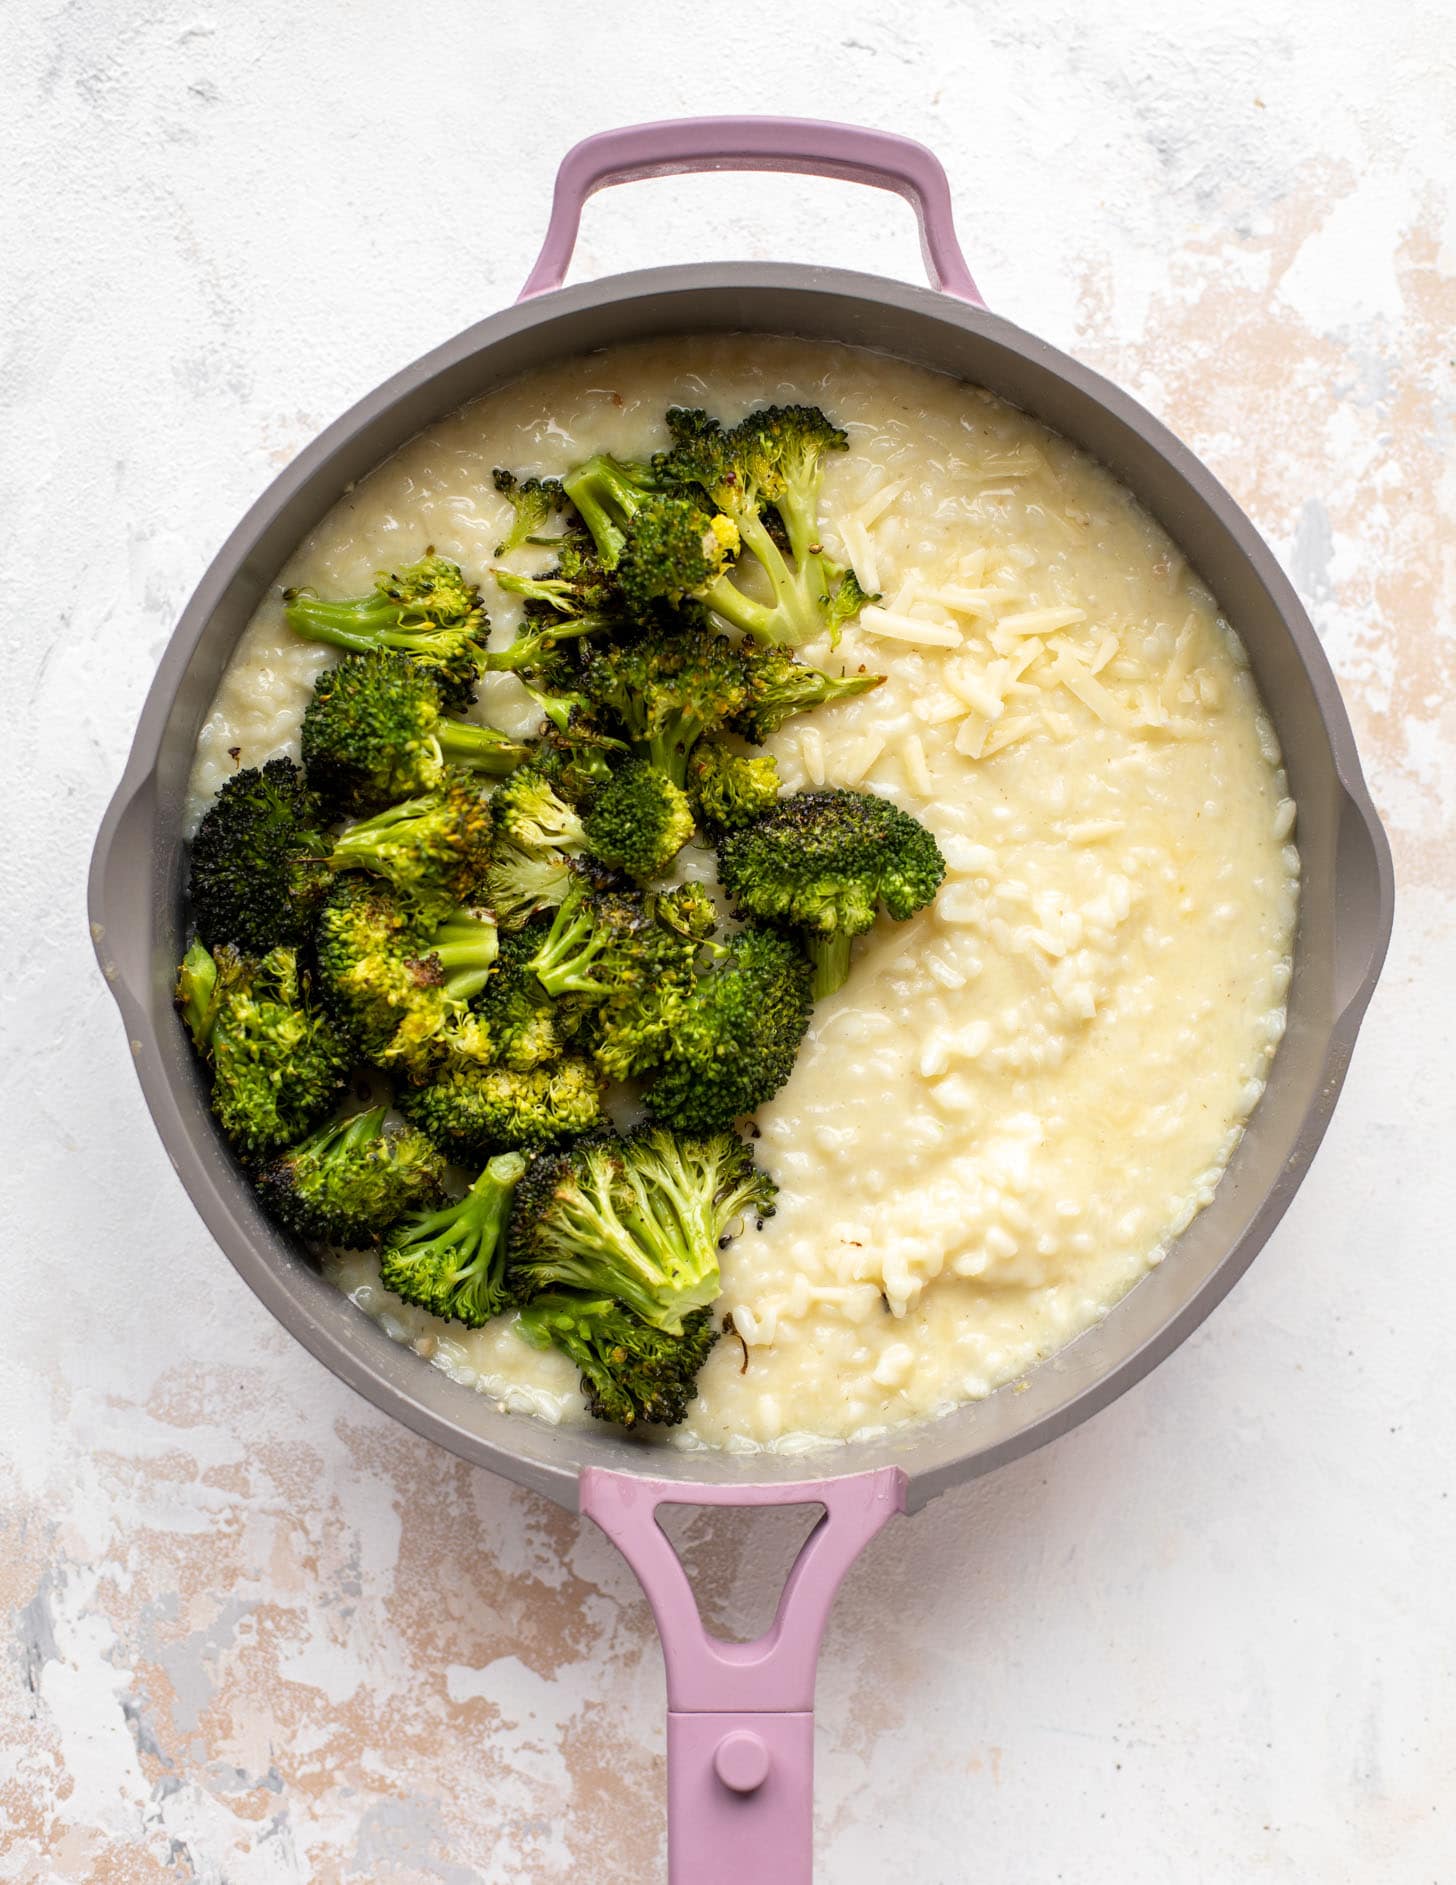 cheddar risotto topped with roasted broccoli